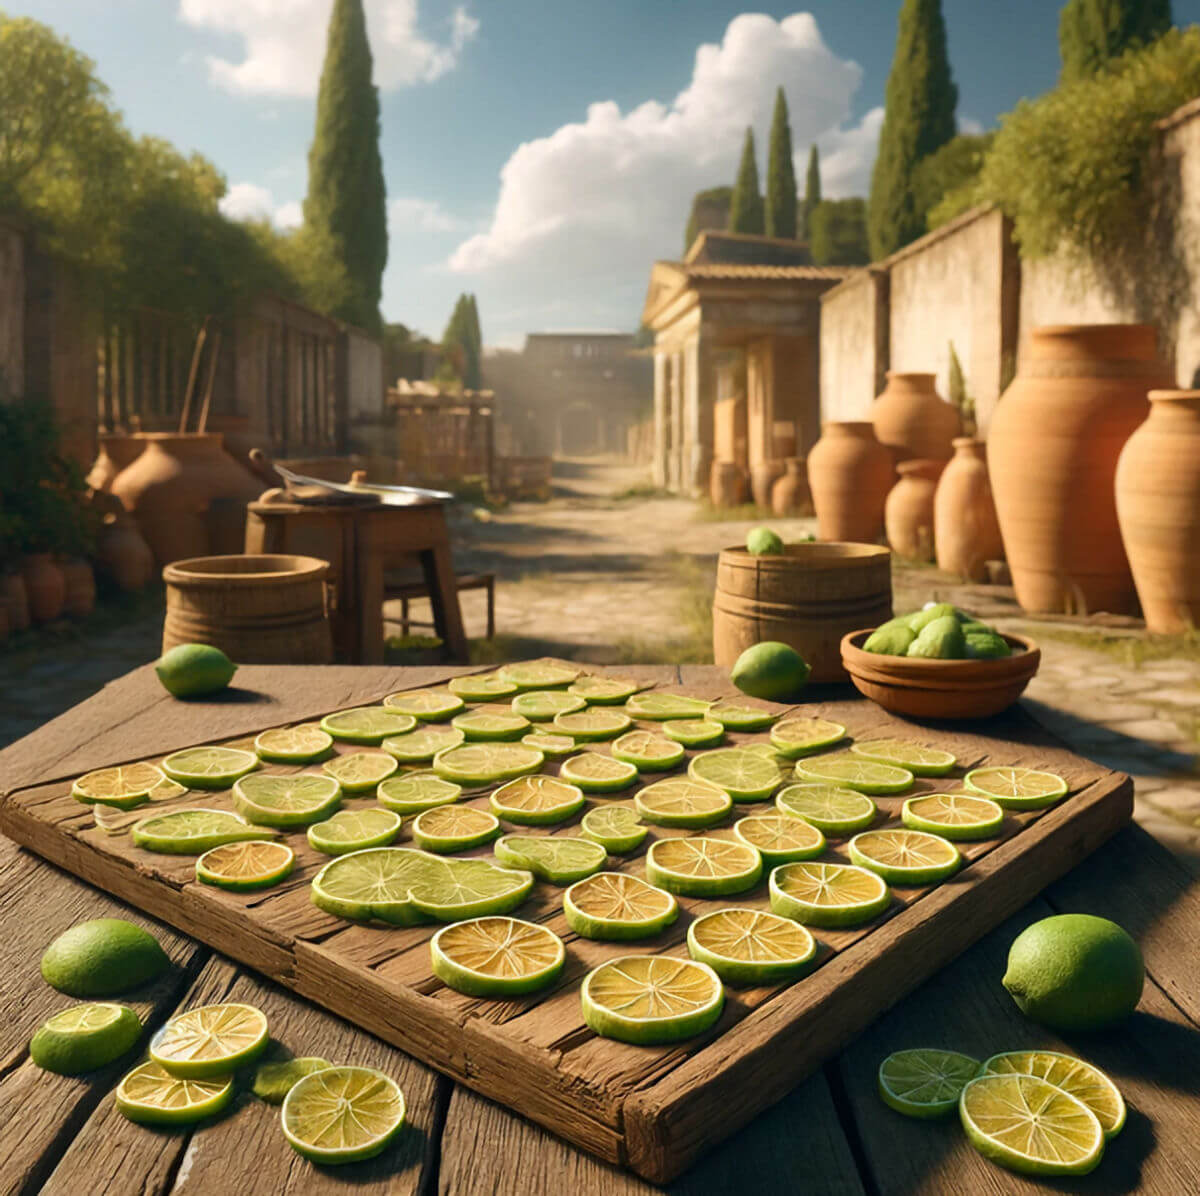 Limes drying outside in the sun